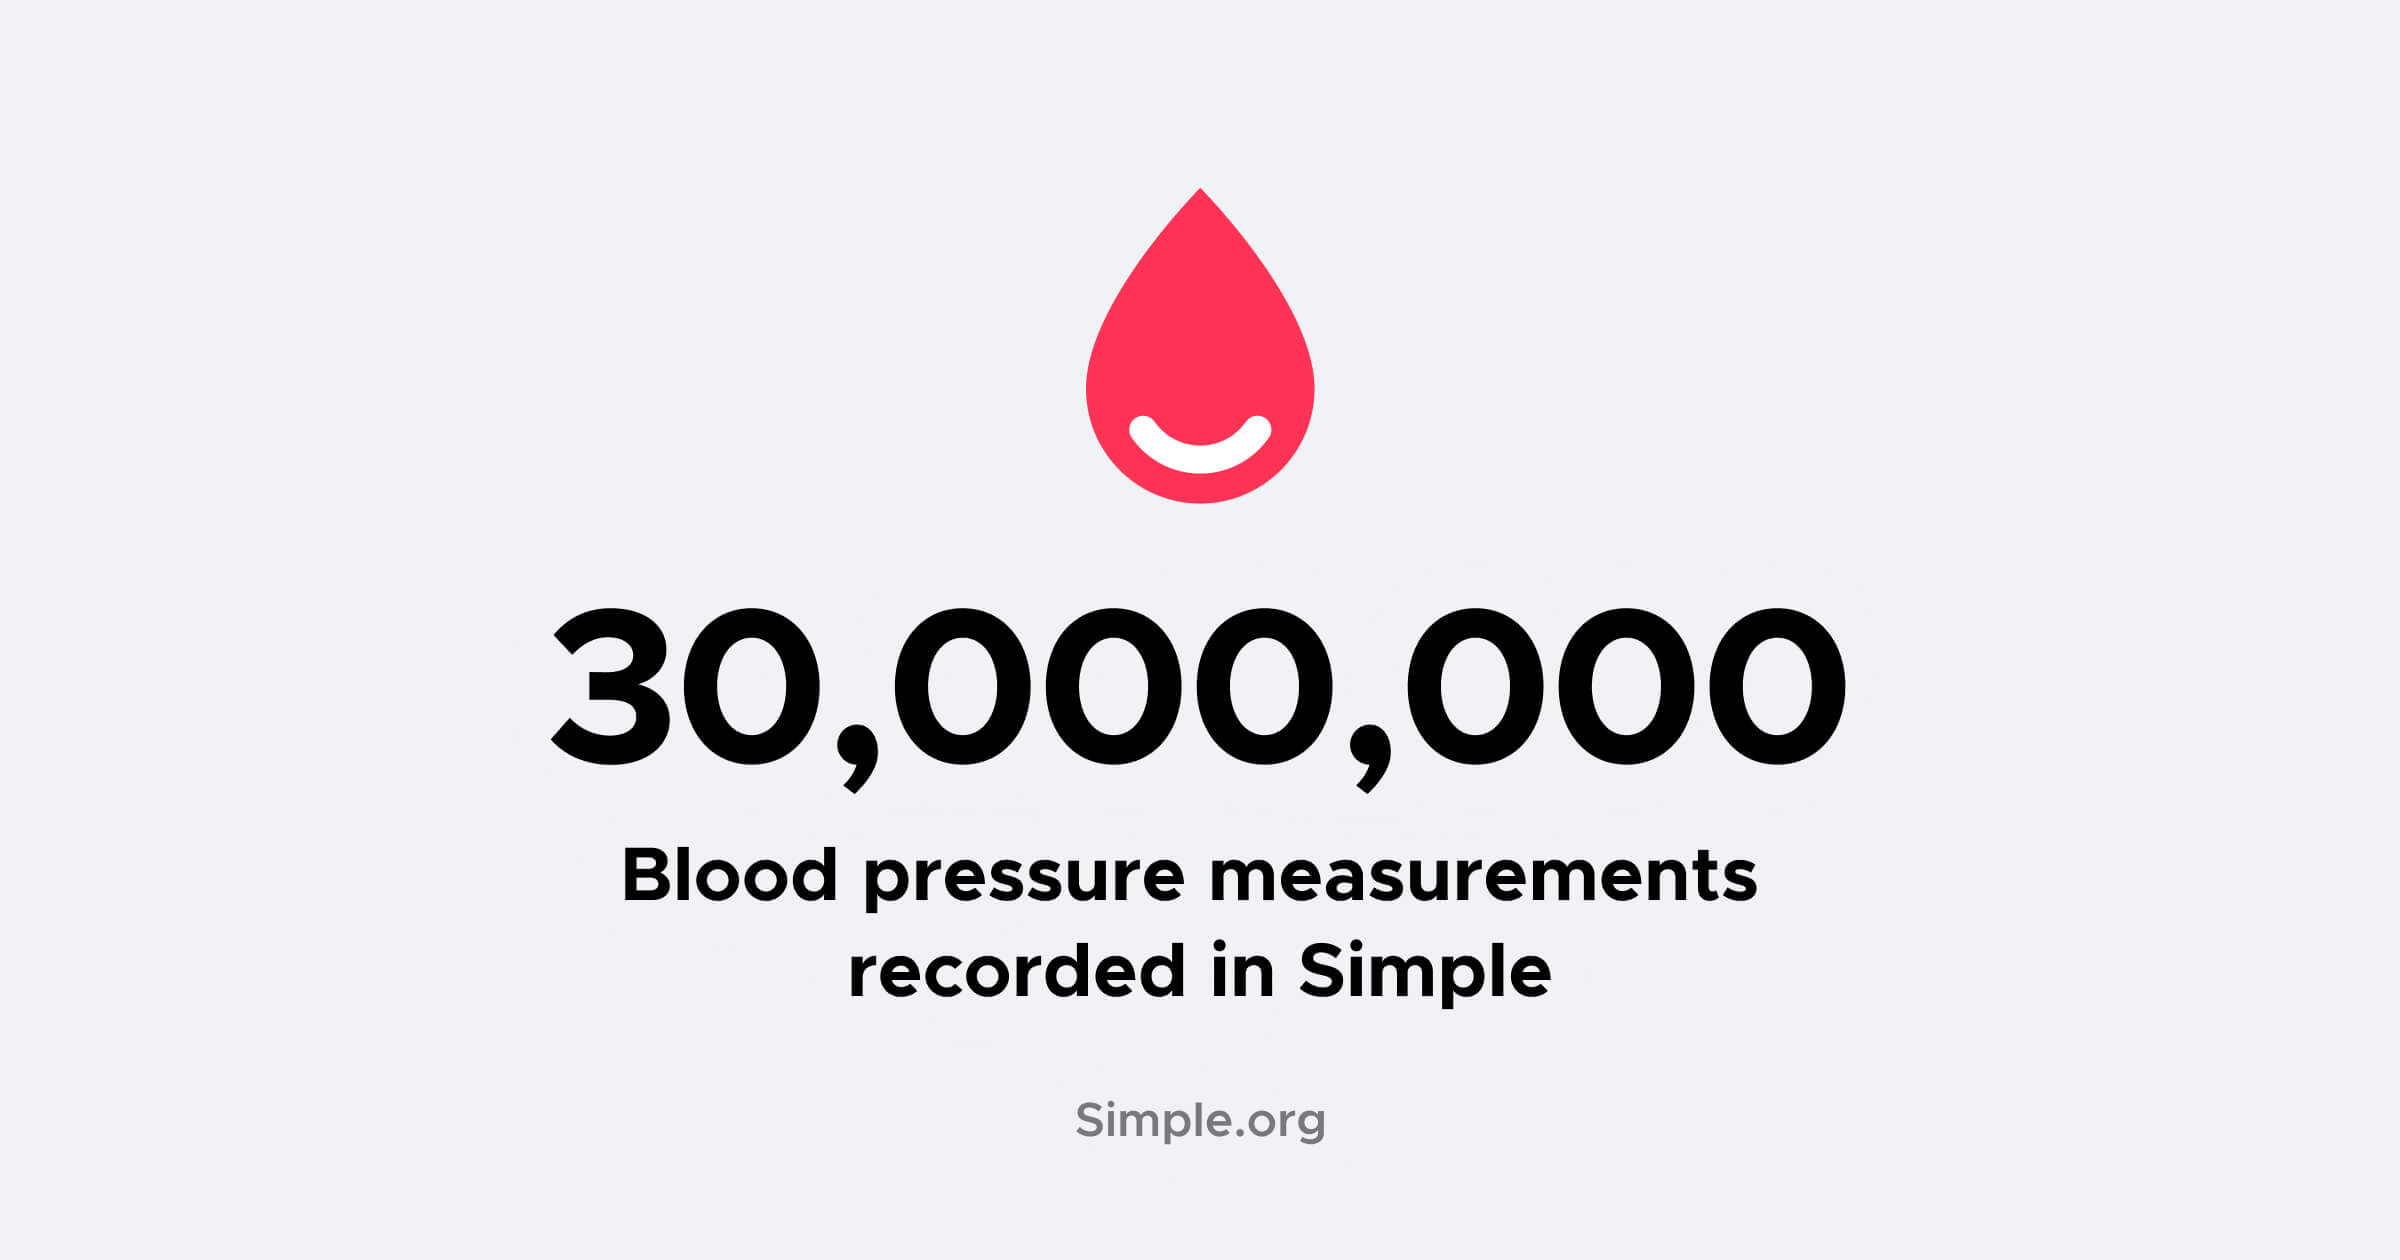 30 million blood pressure measures recorded in Simple